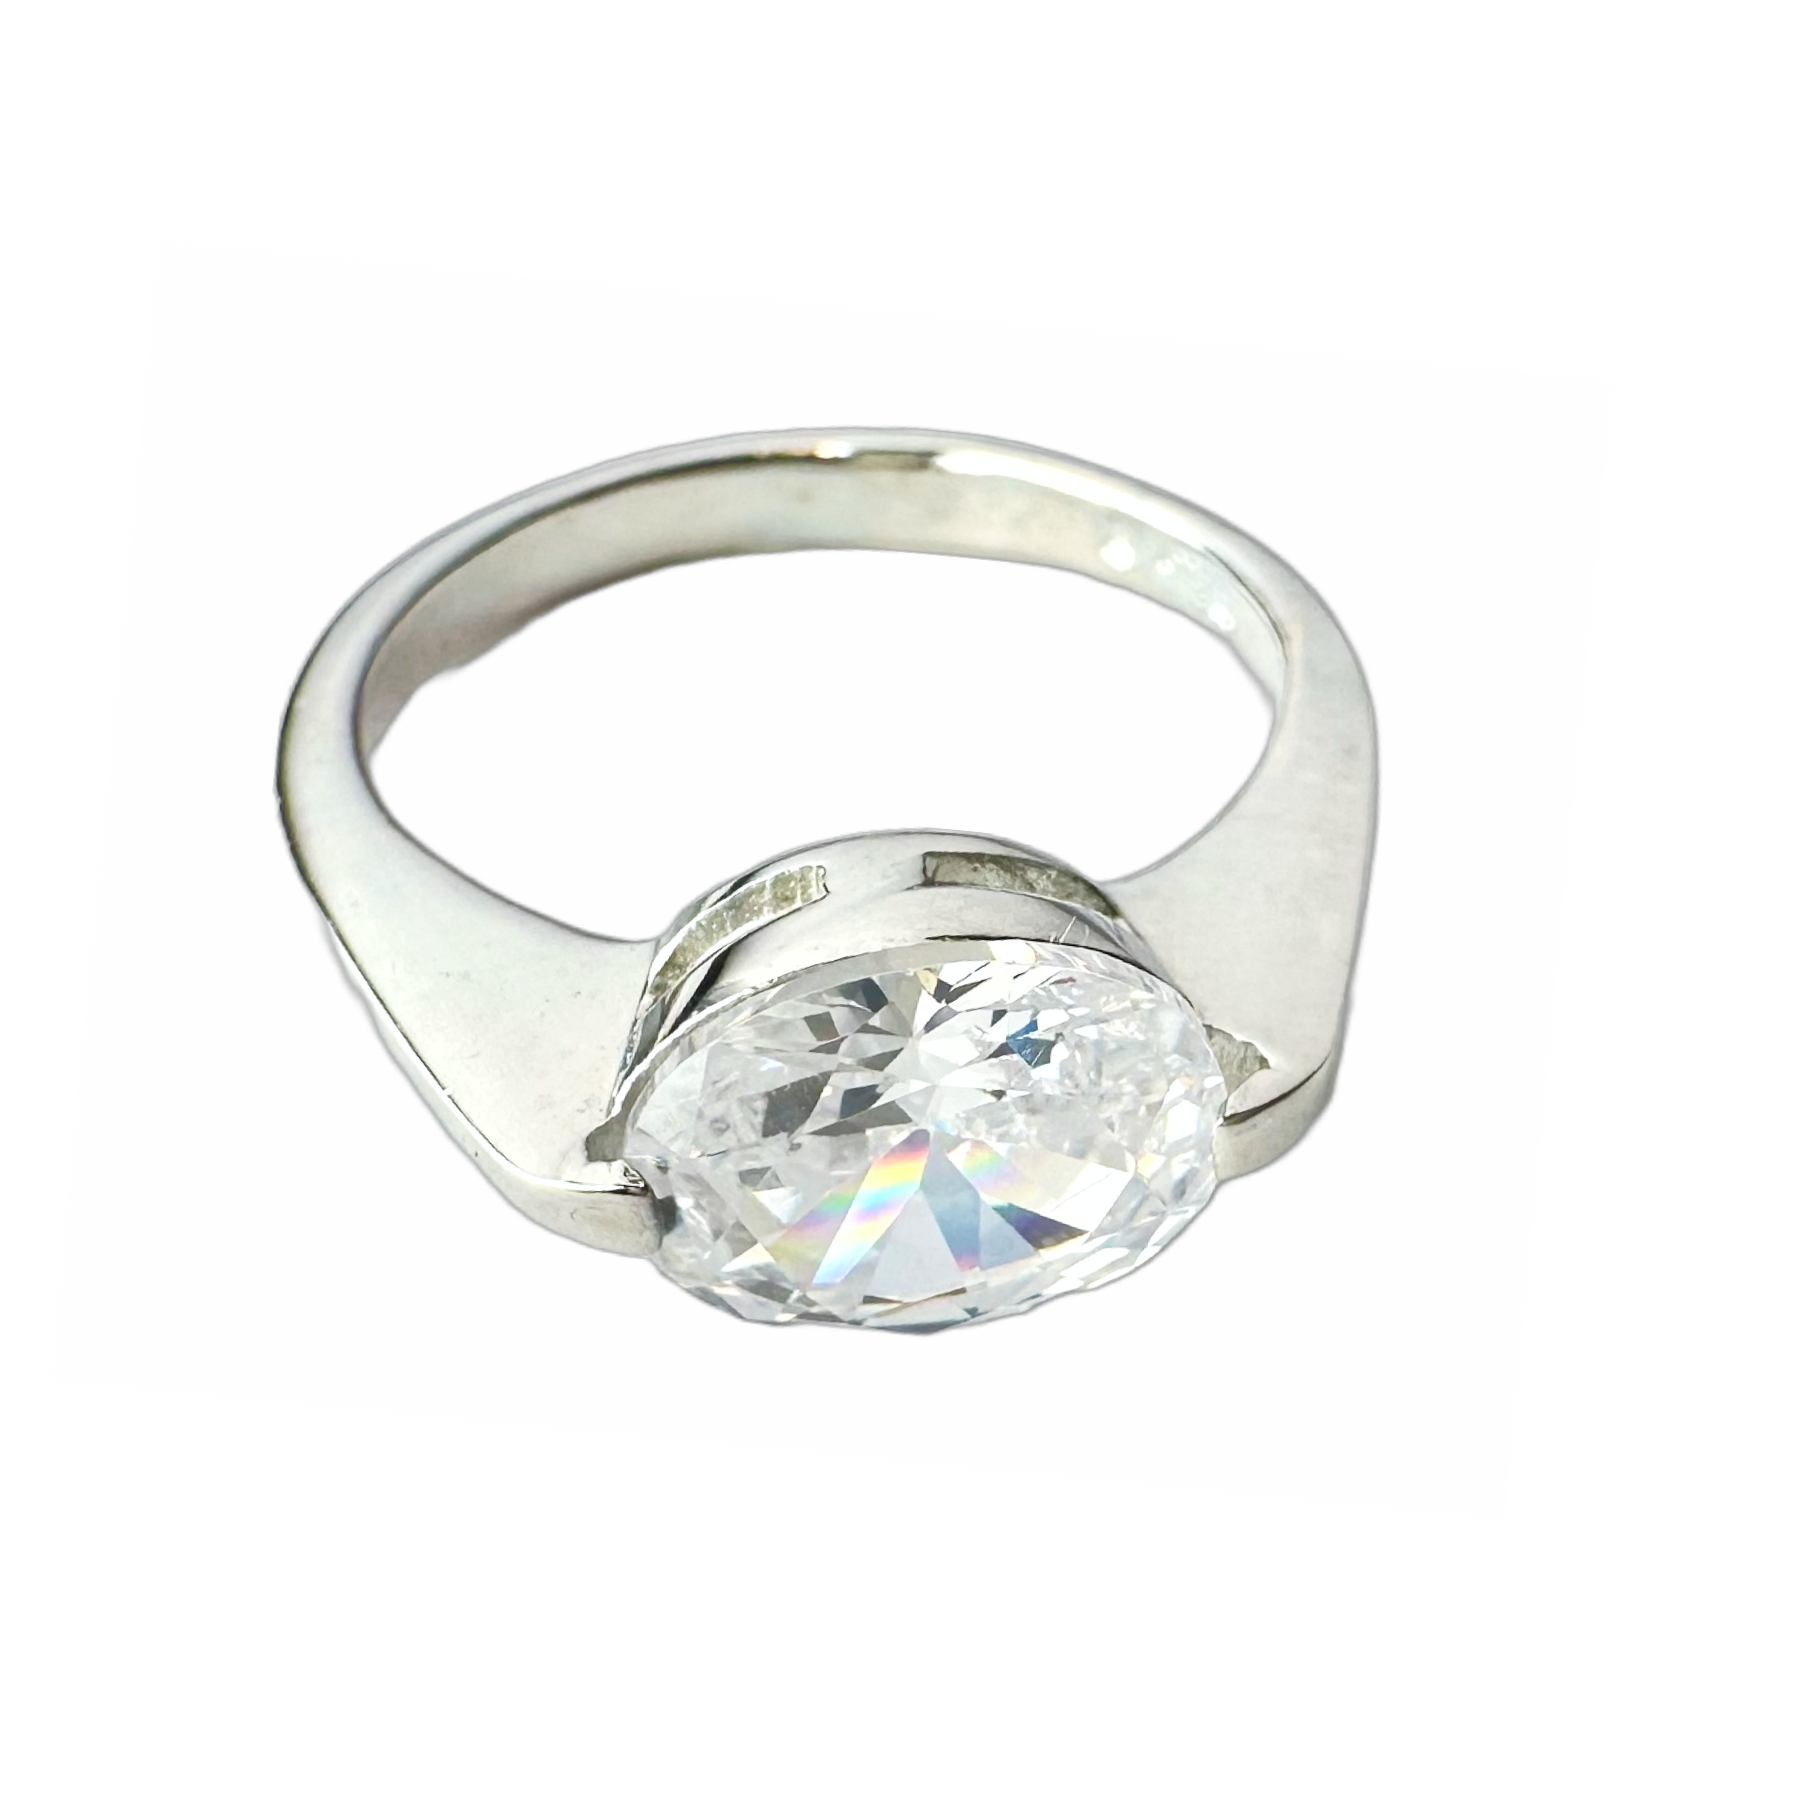 Sterling Silver Vintage Style CZ Oval Solitaire Ring